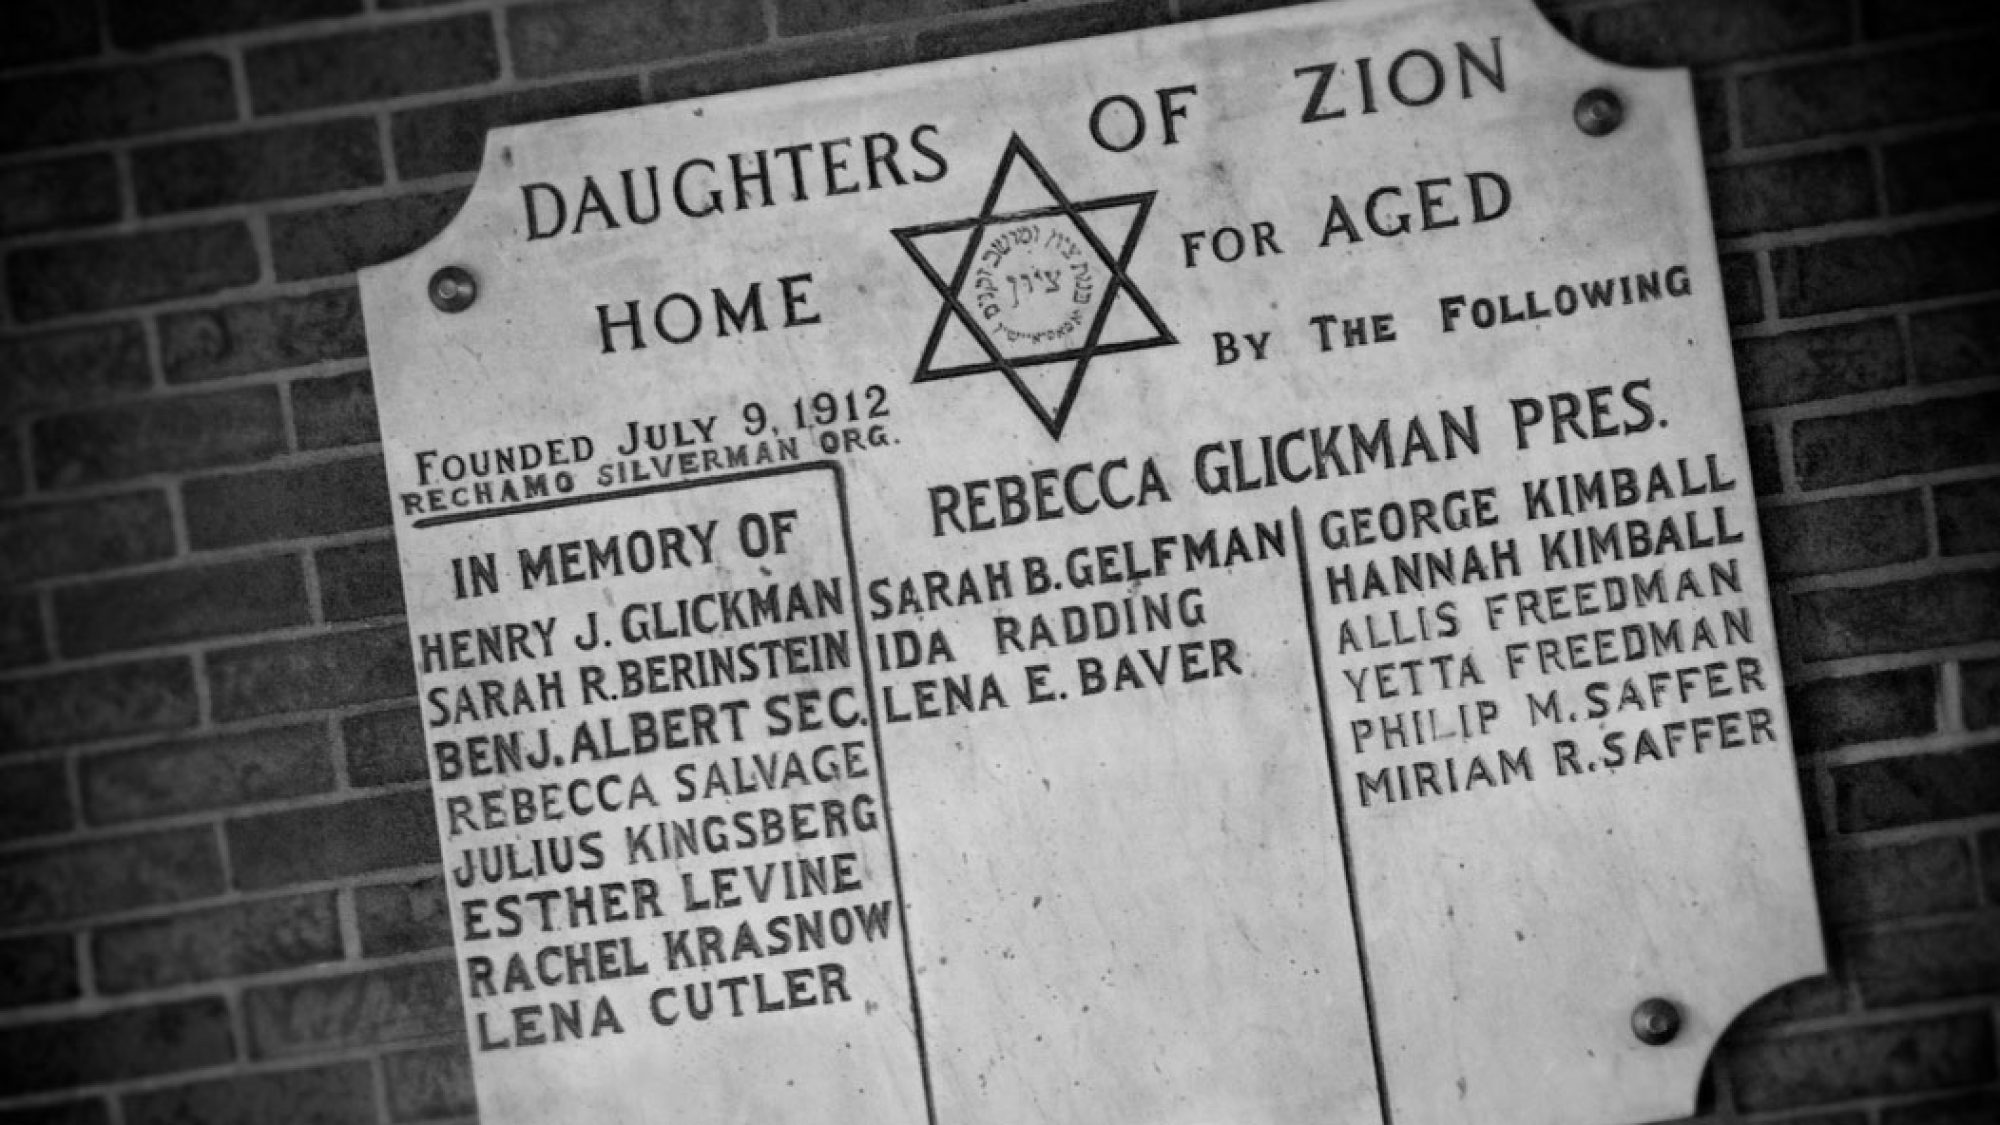 A plaque that says The Daughters of Zion